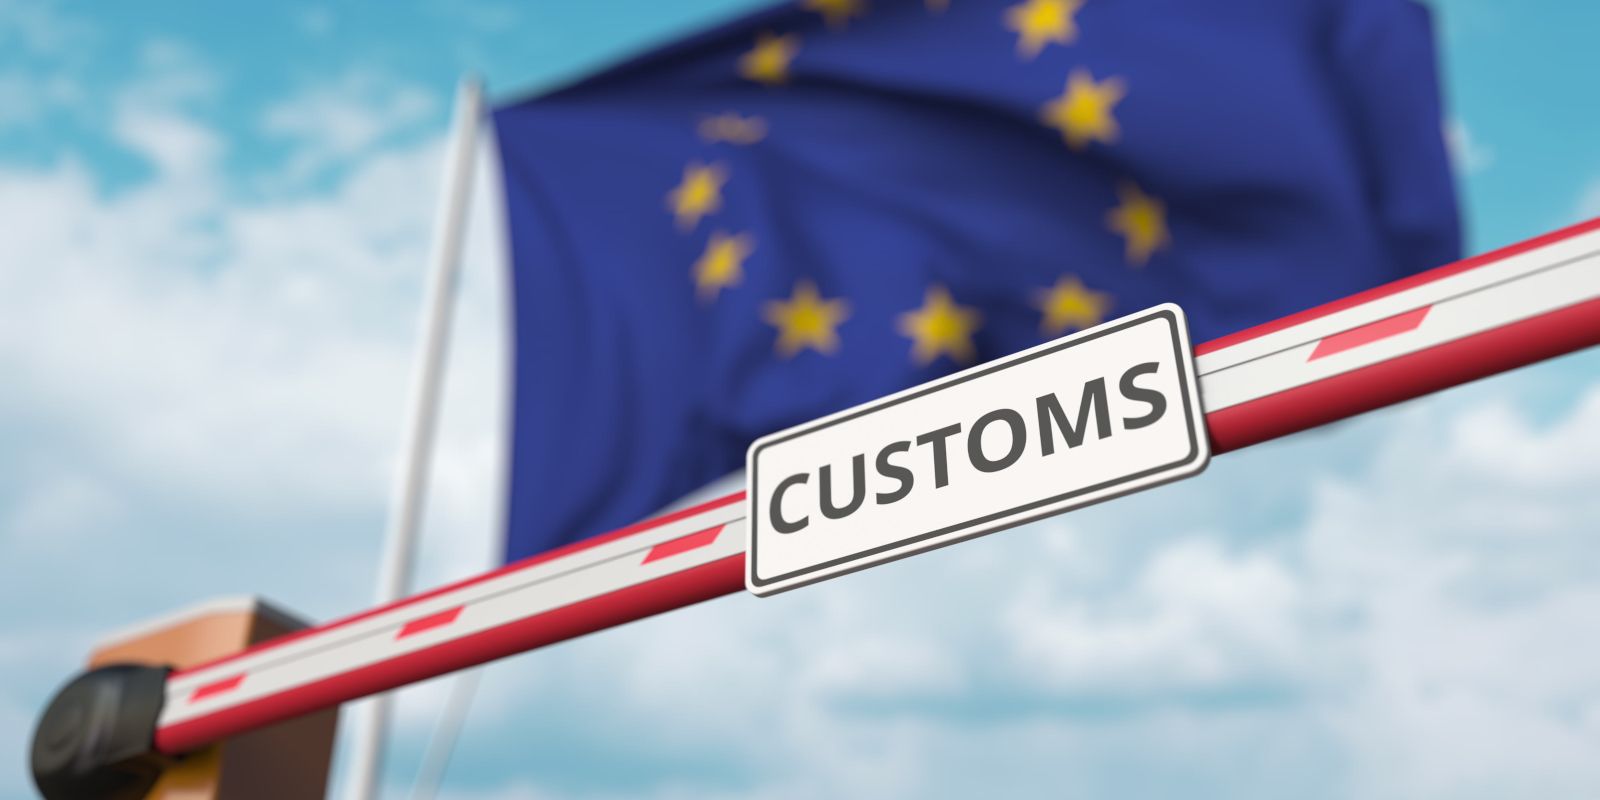 Government grant for customs training funding